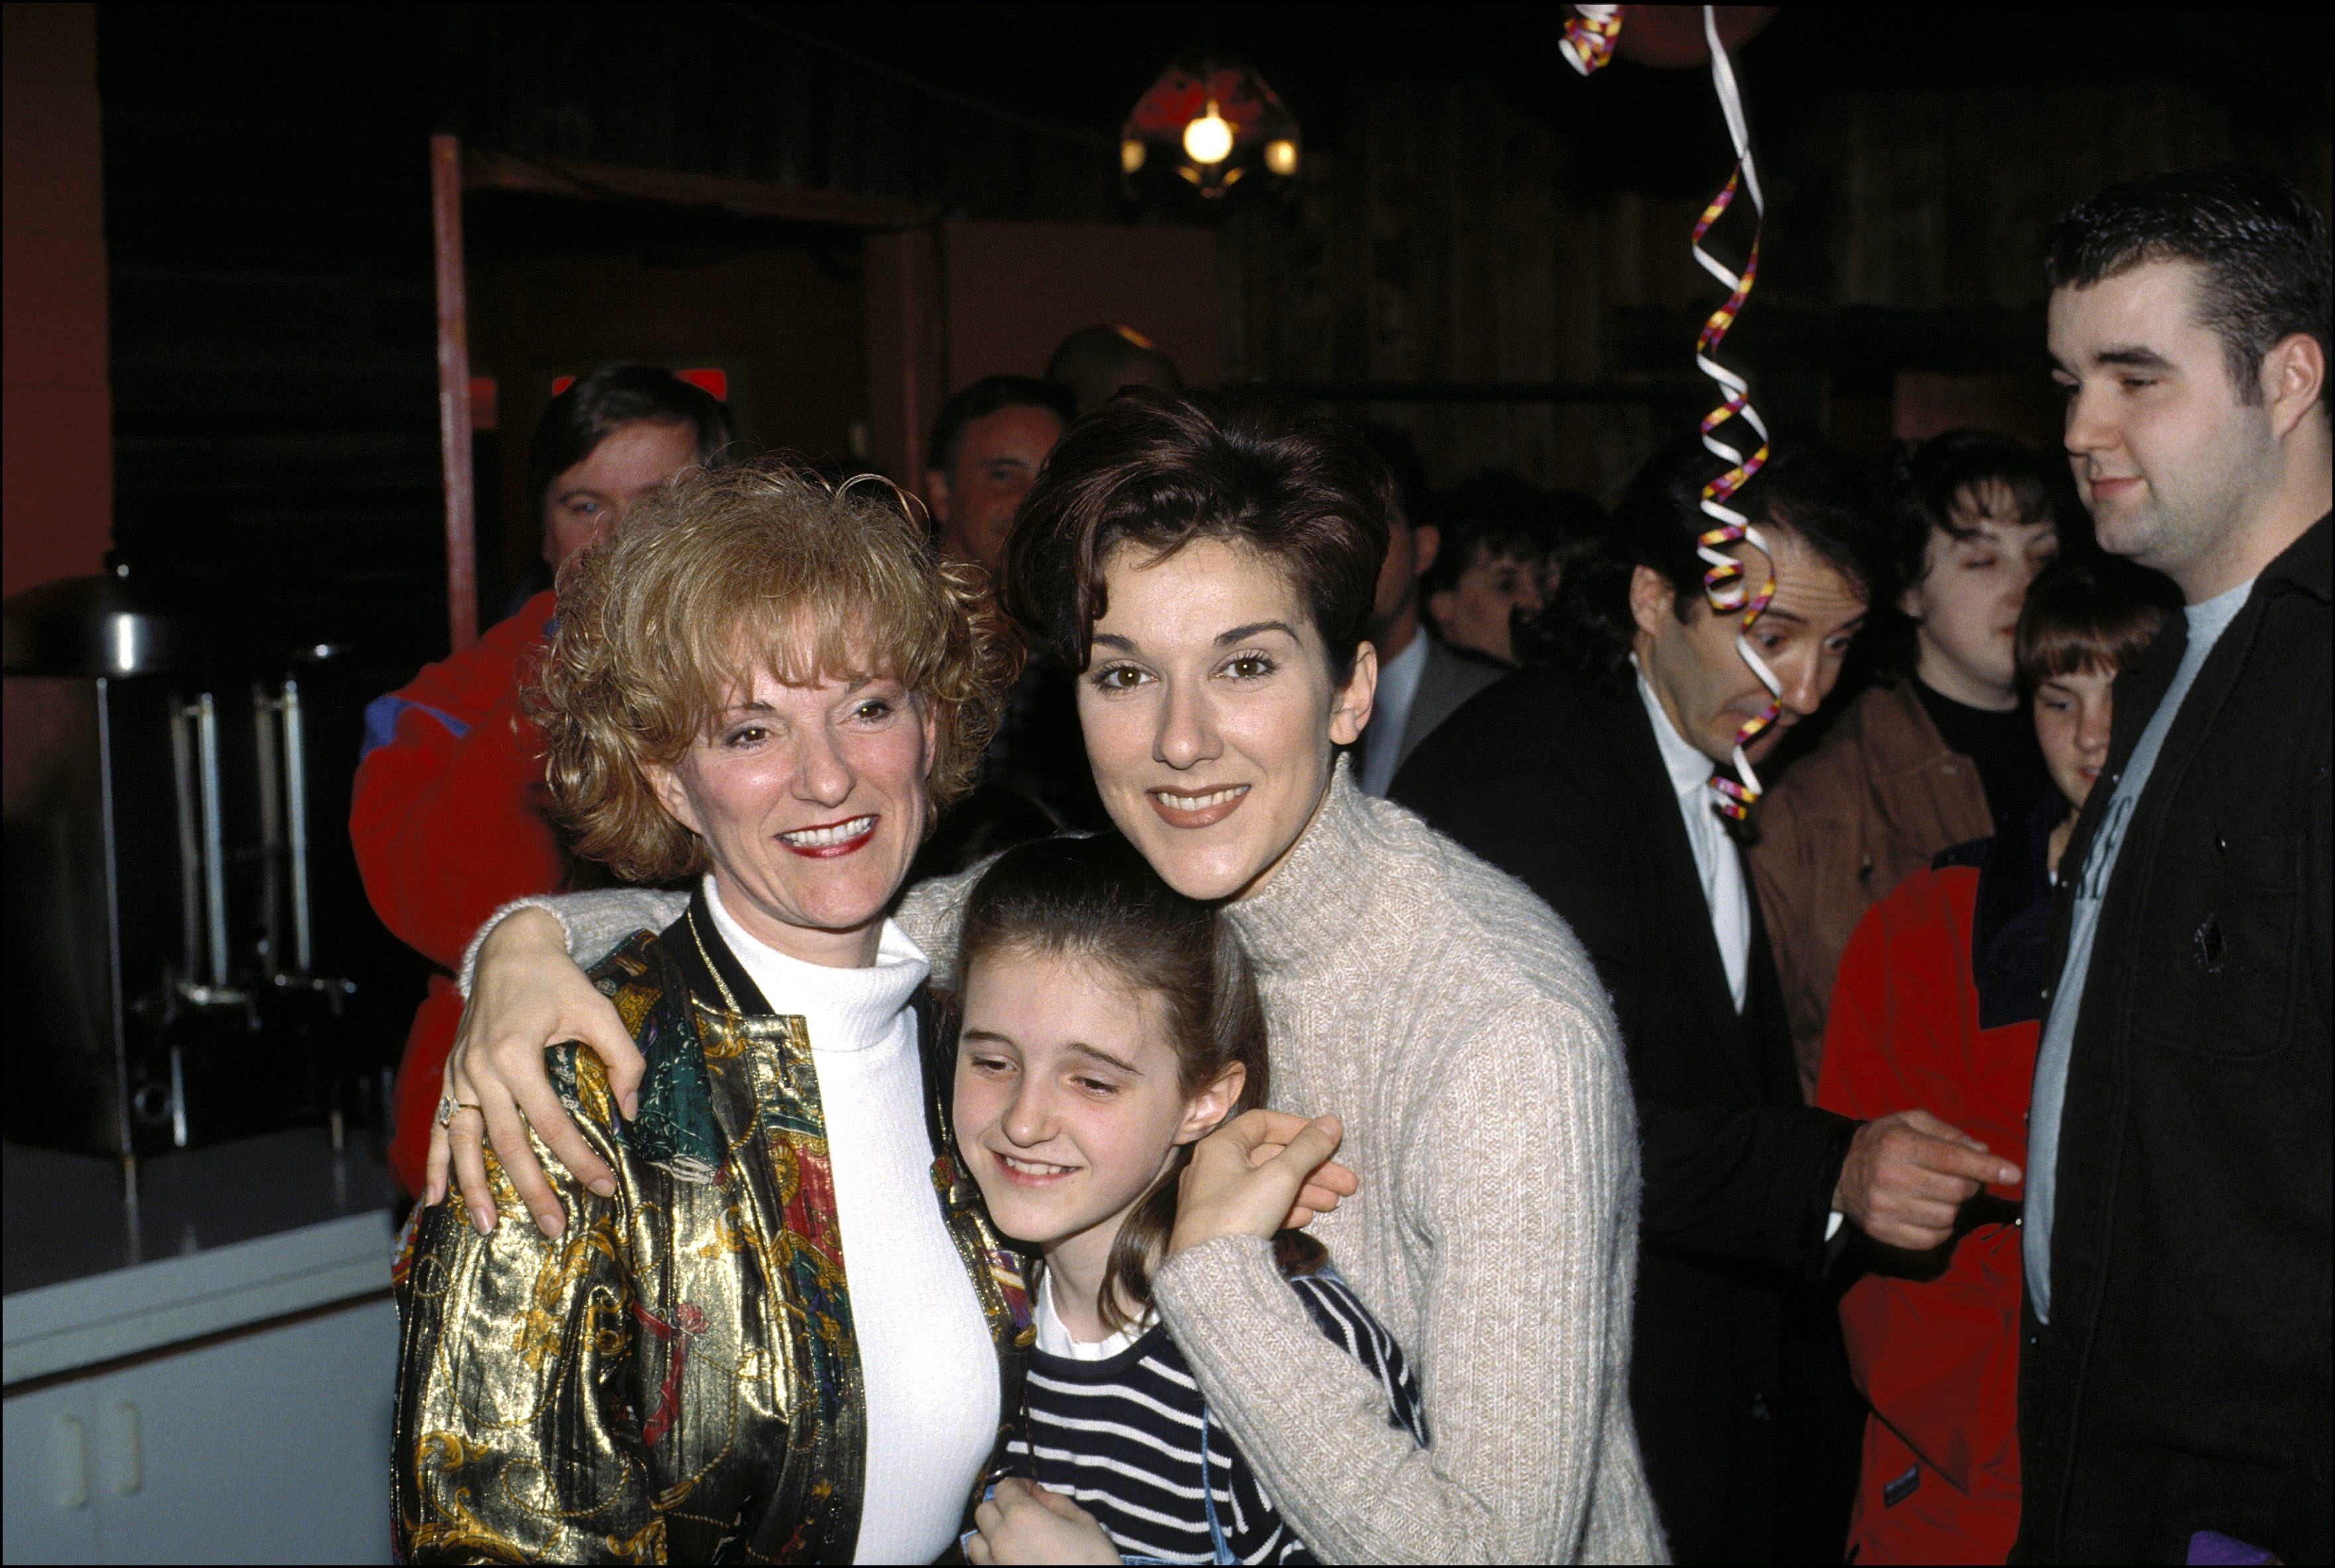 Claudette and Celine Dion celebrate her 27th anniversary in Canada on March 31, 1995. | Source: Getty Images